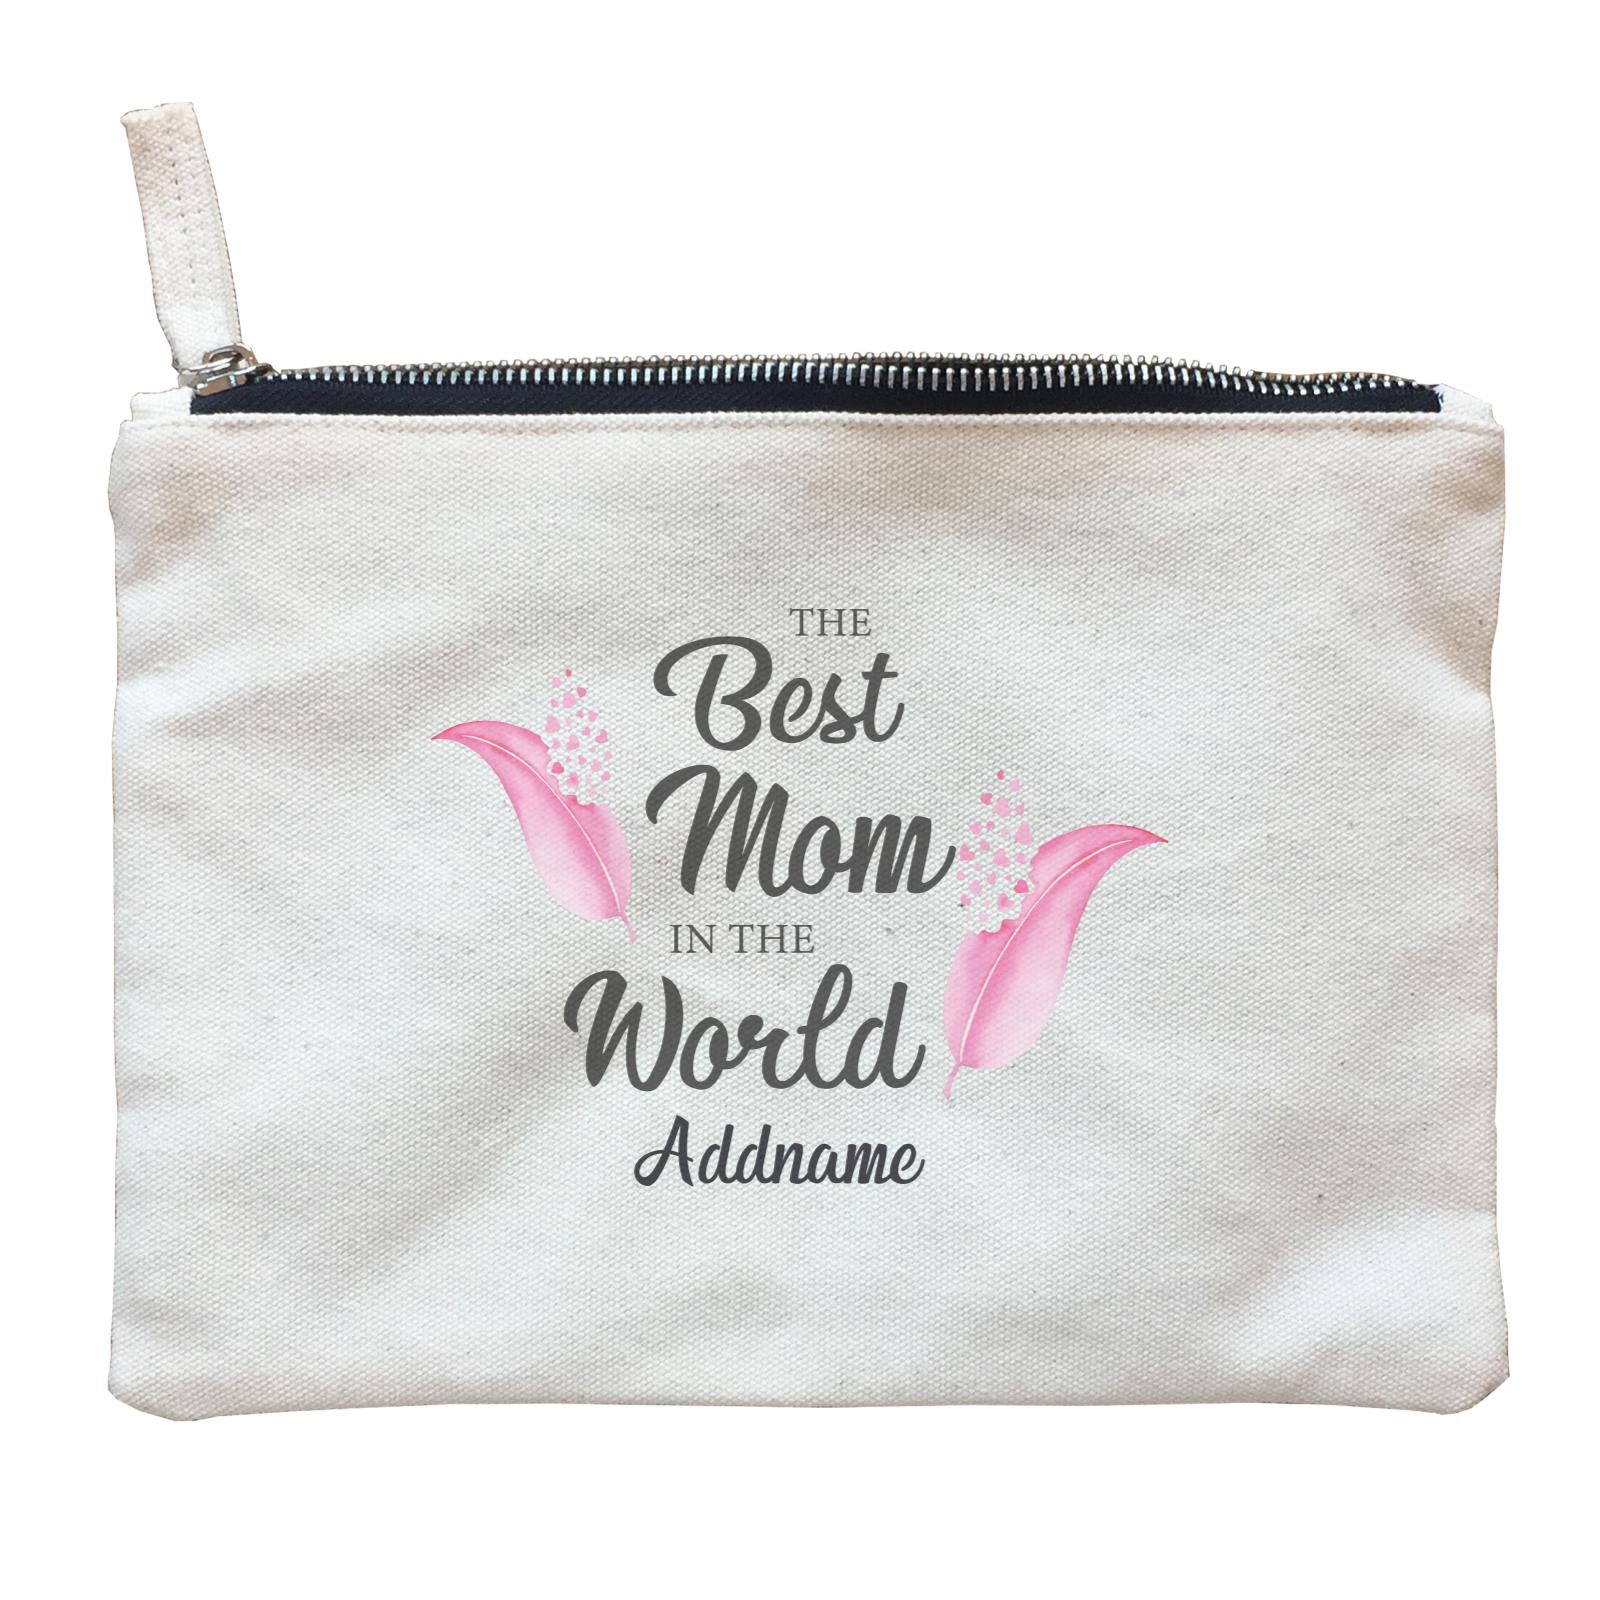 Sweet Mom Quotes 1 Love Feathers The Best Mom In The World Addname Accessories Zipper Pouch